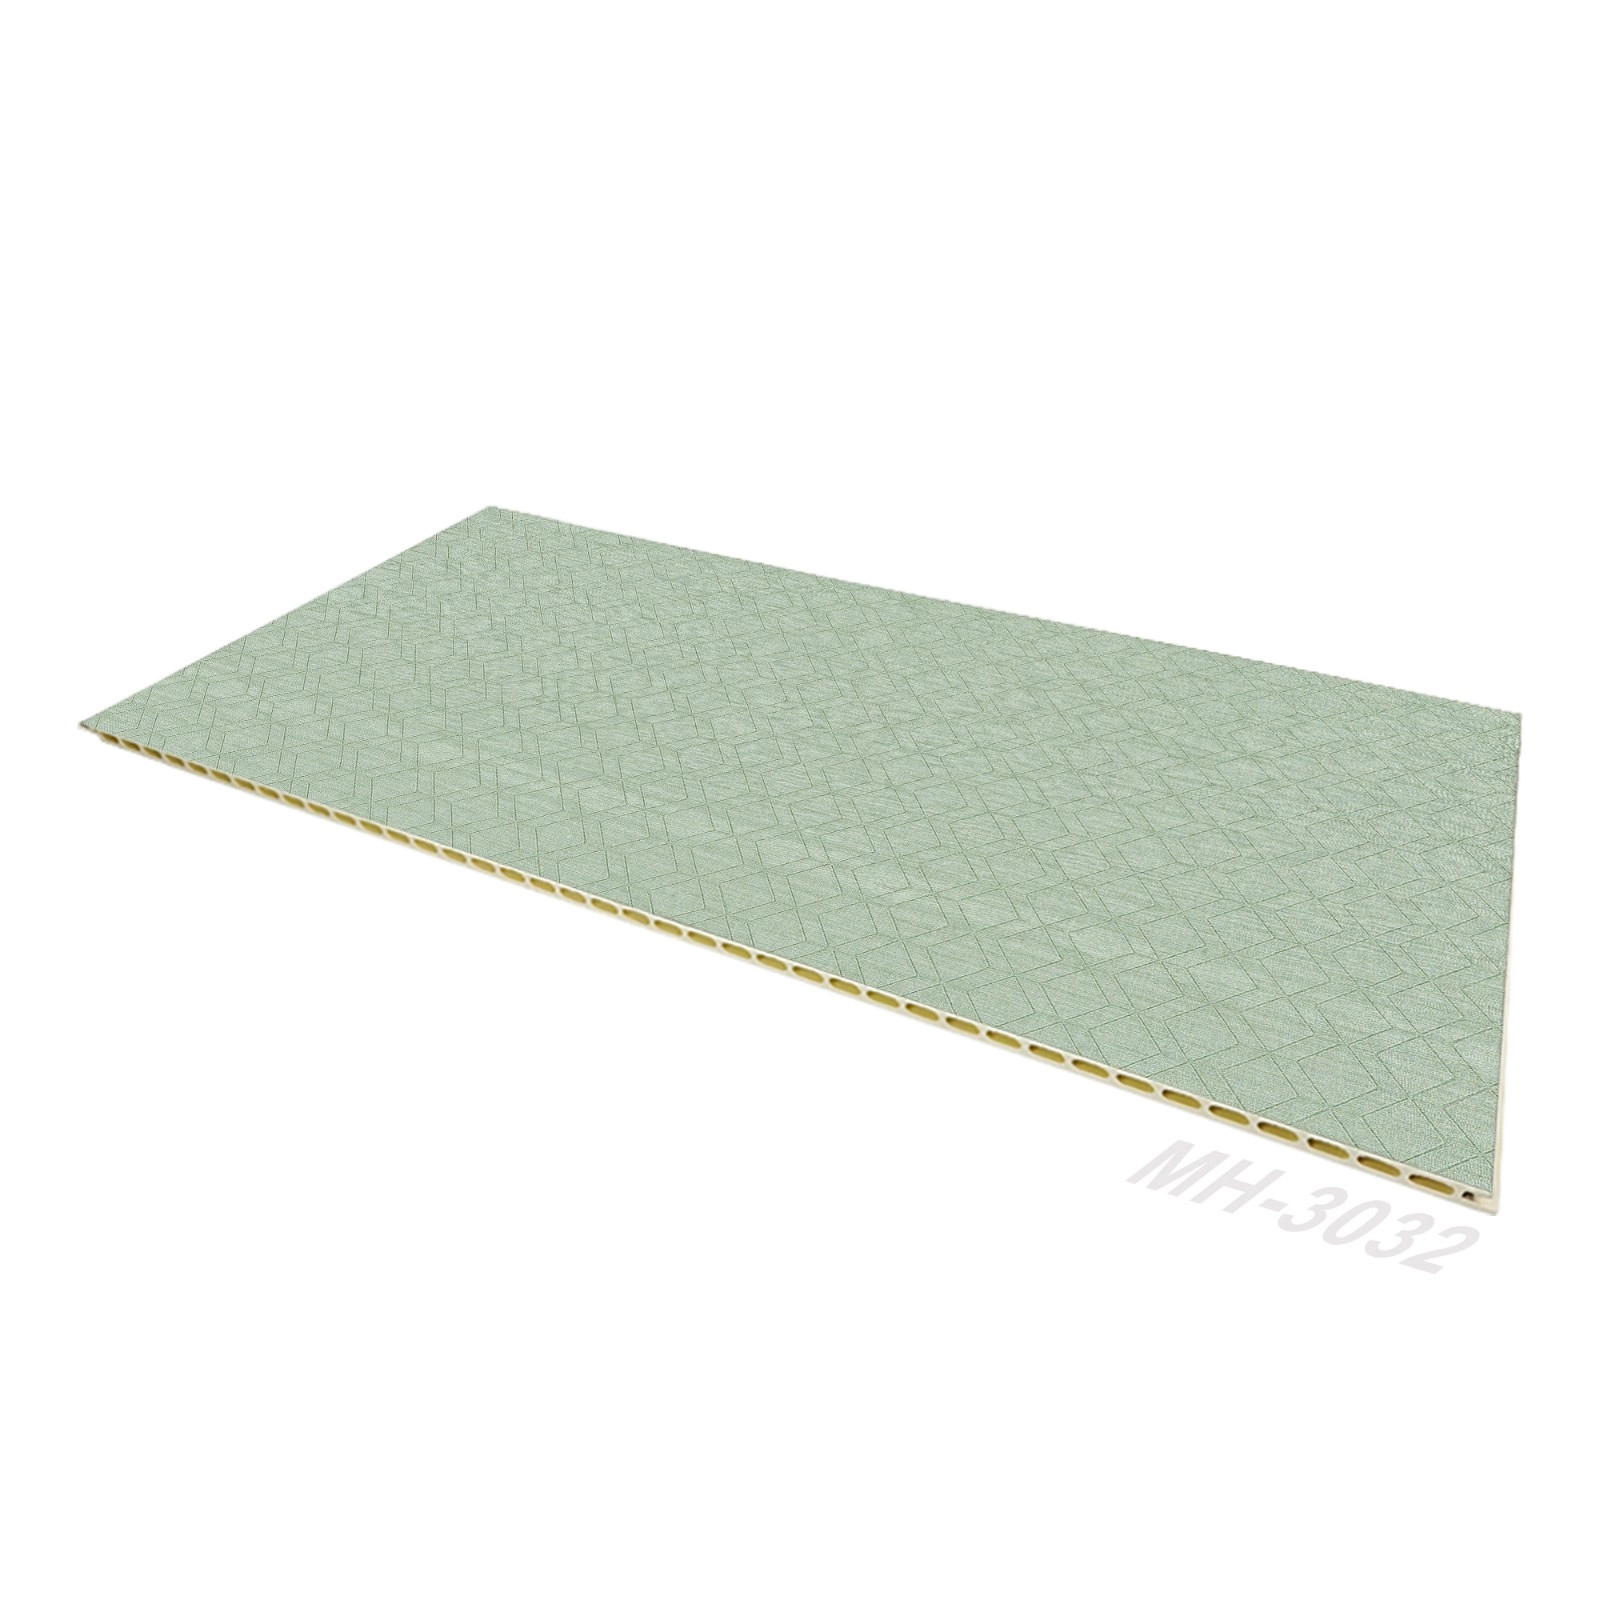 E0 Green Easy Cleaning Fabric Wall Plank